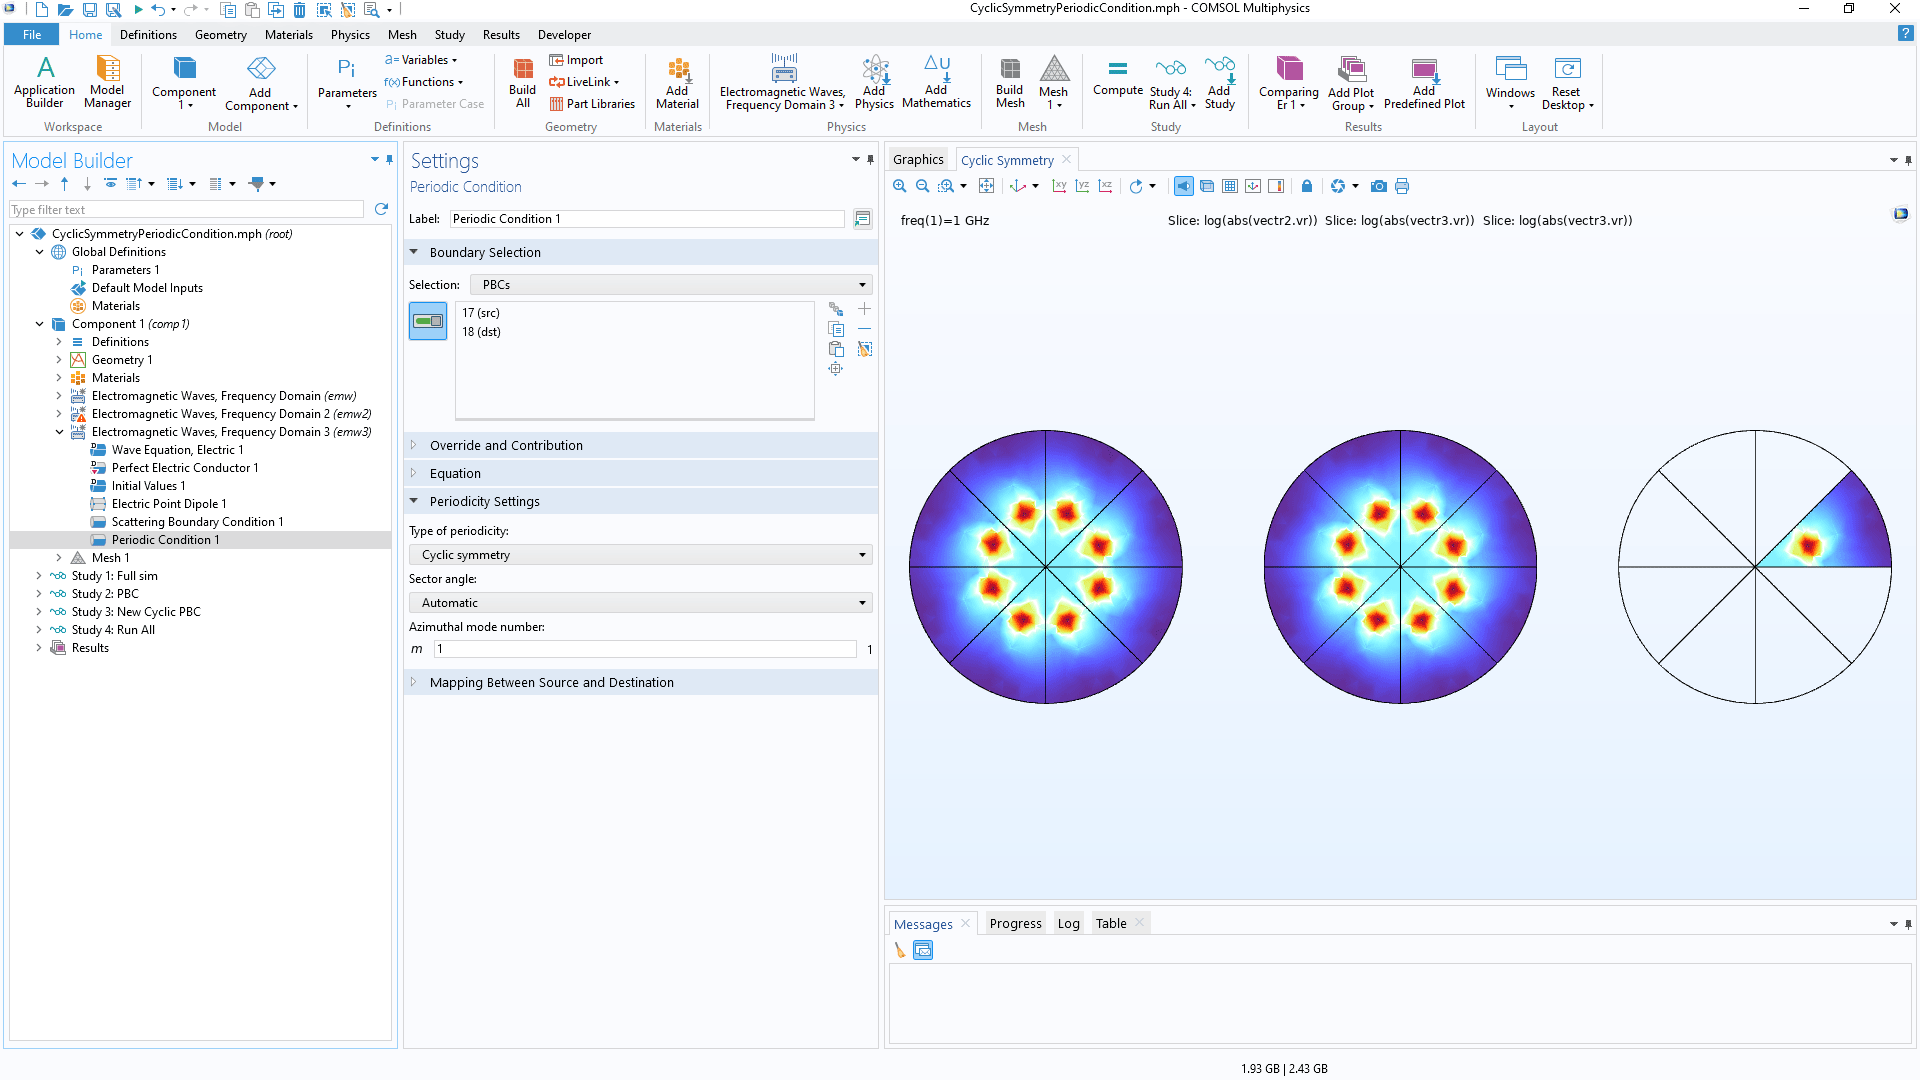 The COMSOL Multiphysics UI showing the Model Builder with the Periodic Condition node highlighted, the corresponding Settings window with the Cyclic symmetry periodicity option selected, and cyclically arranged electric dipoles in the Graphics window.